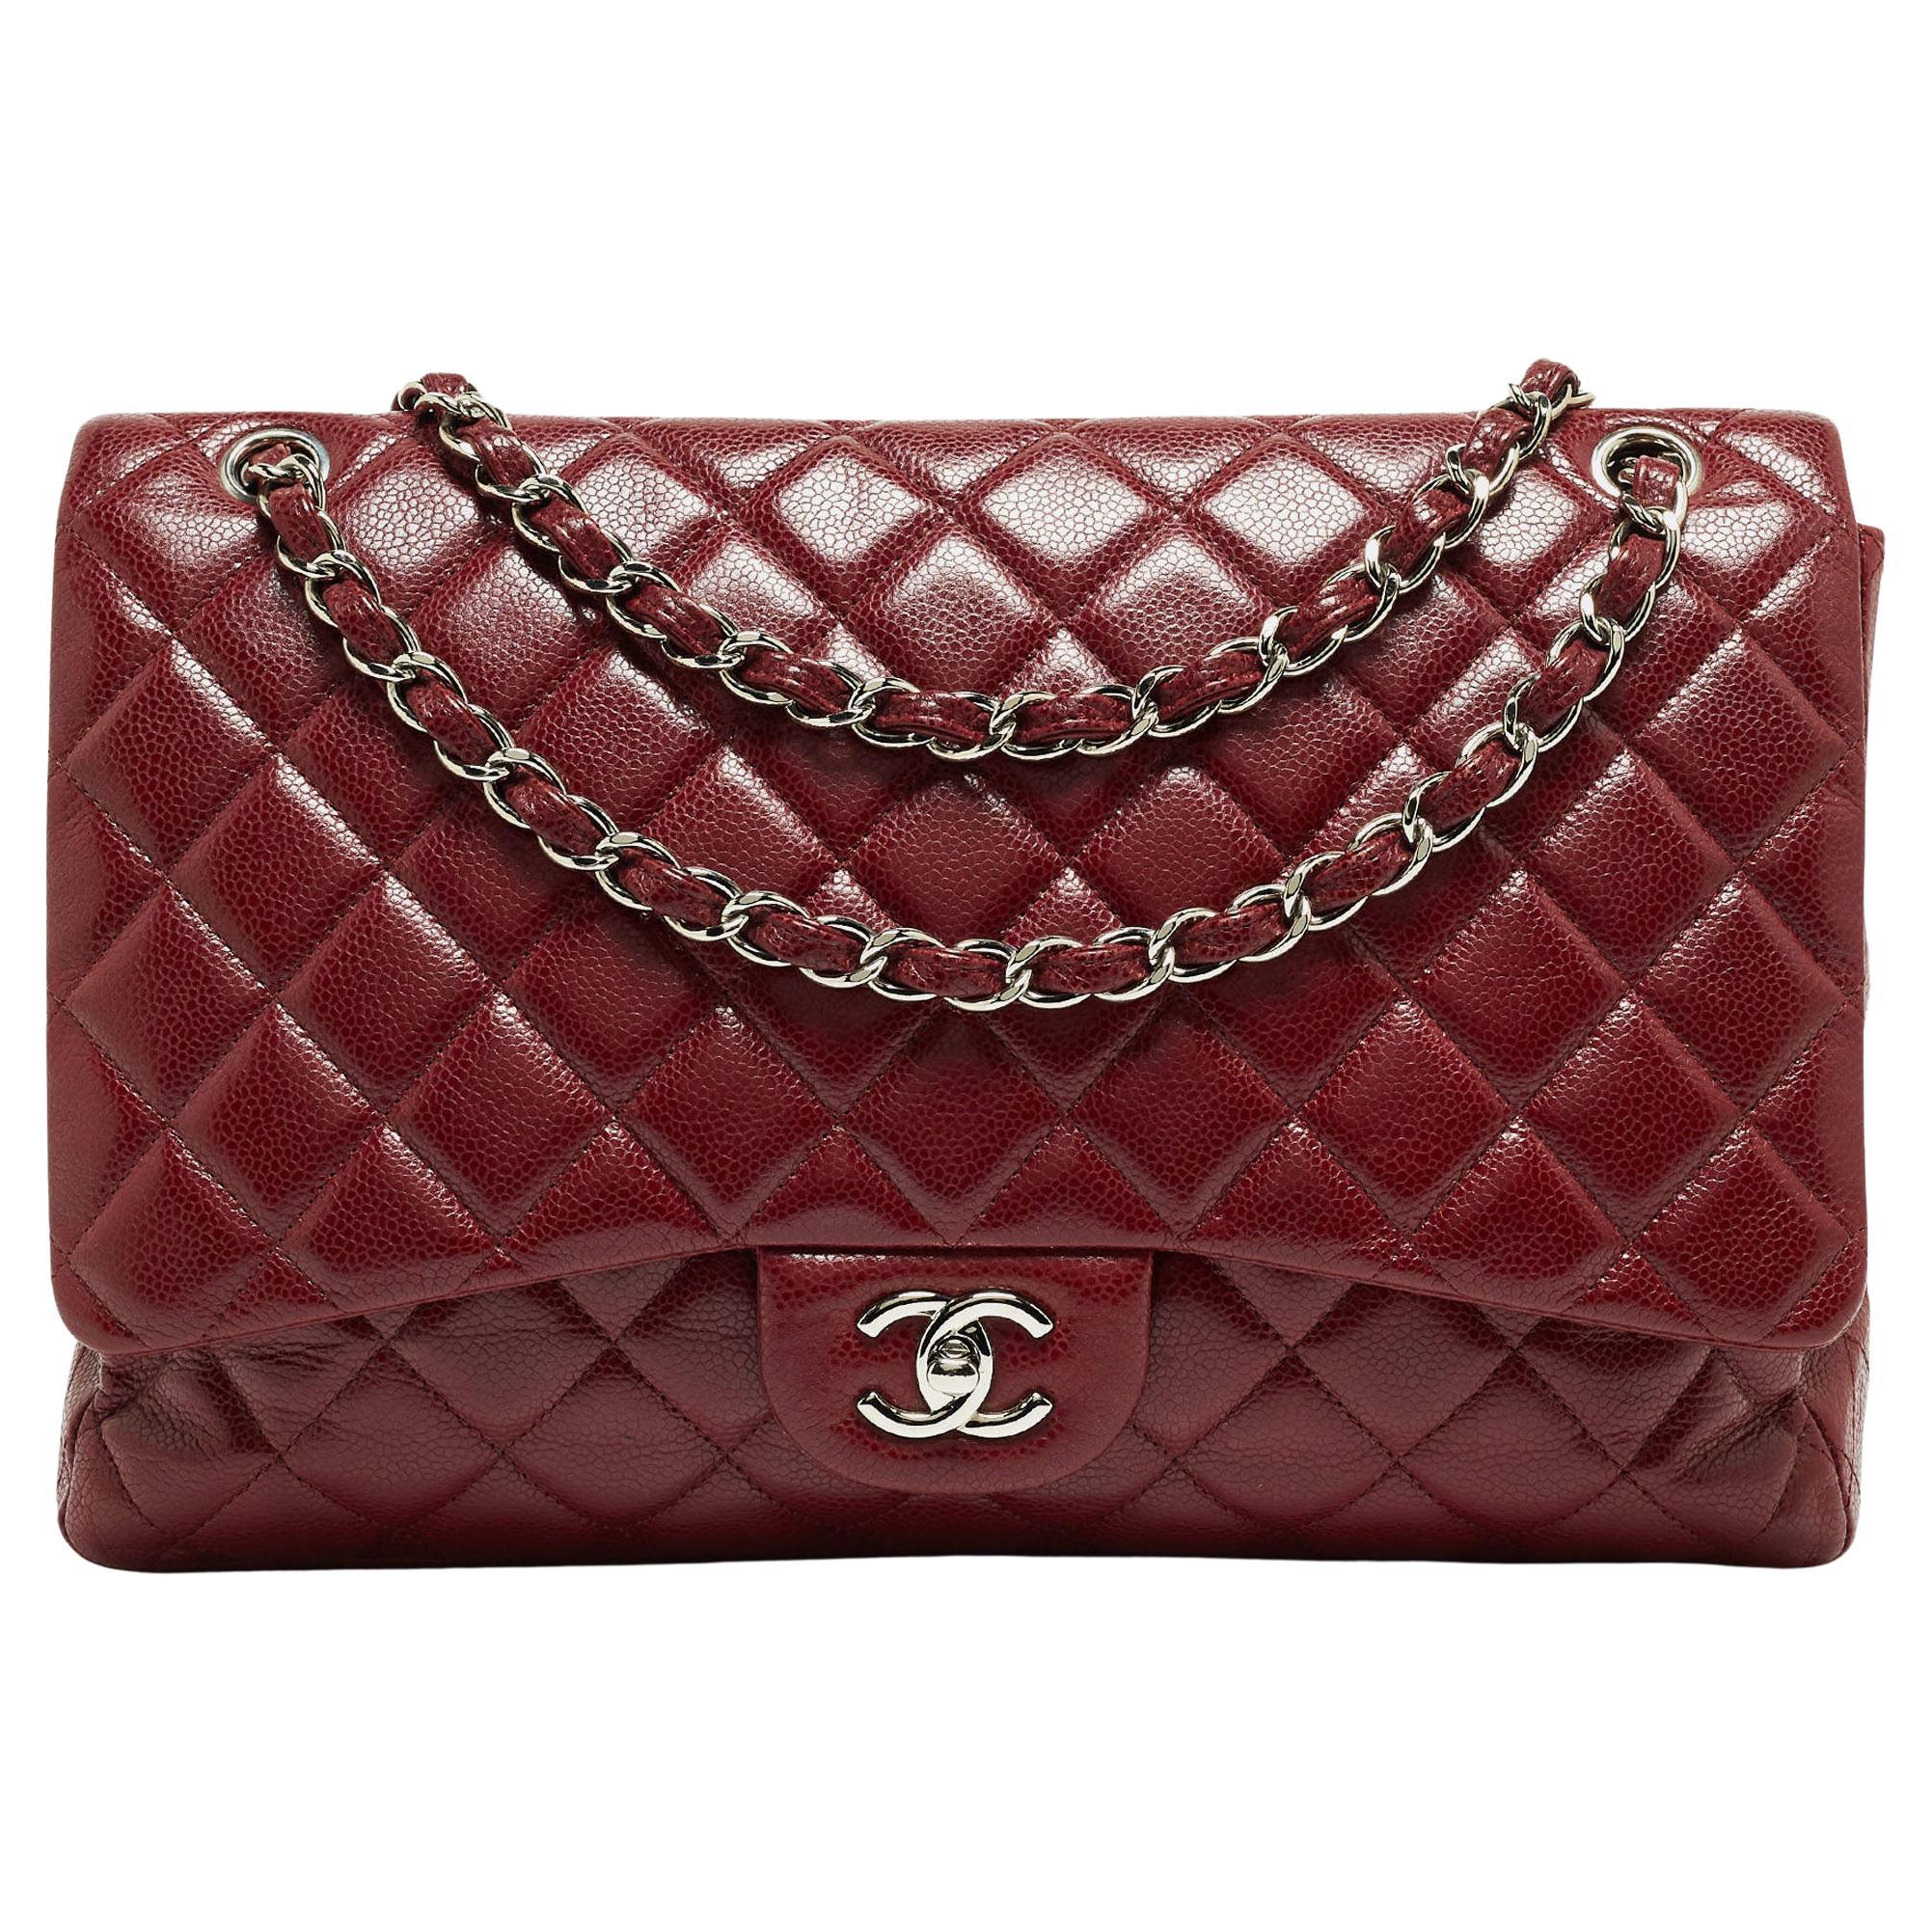 Chanel Burgundy Quilted Caviar Leather Maxi Classic Single Flap Bag For Sale